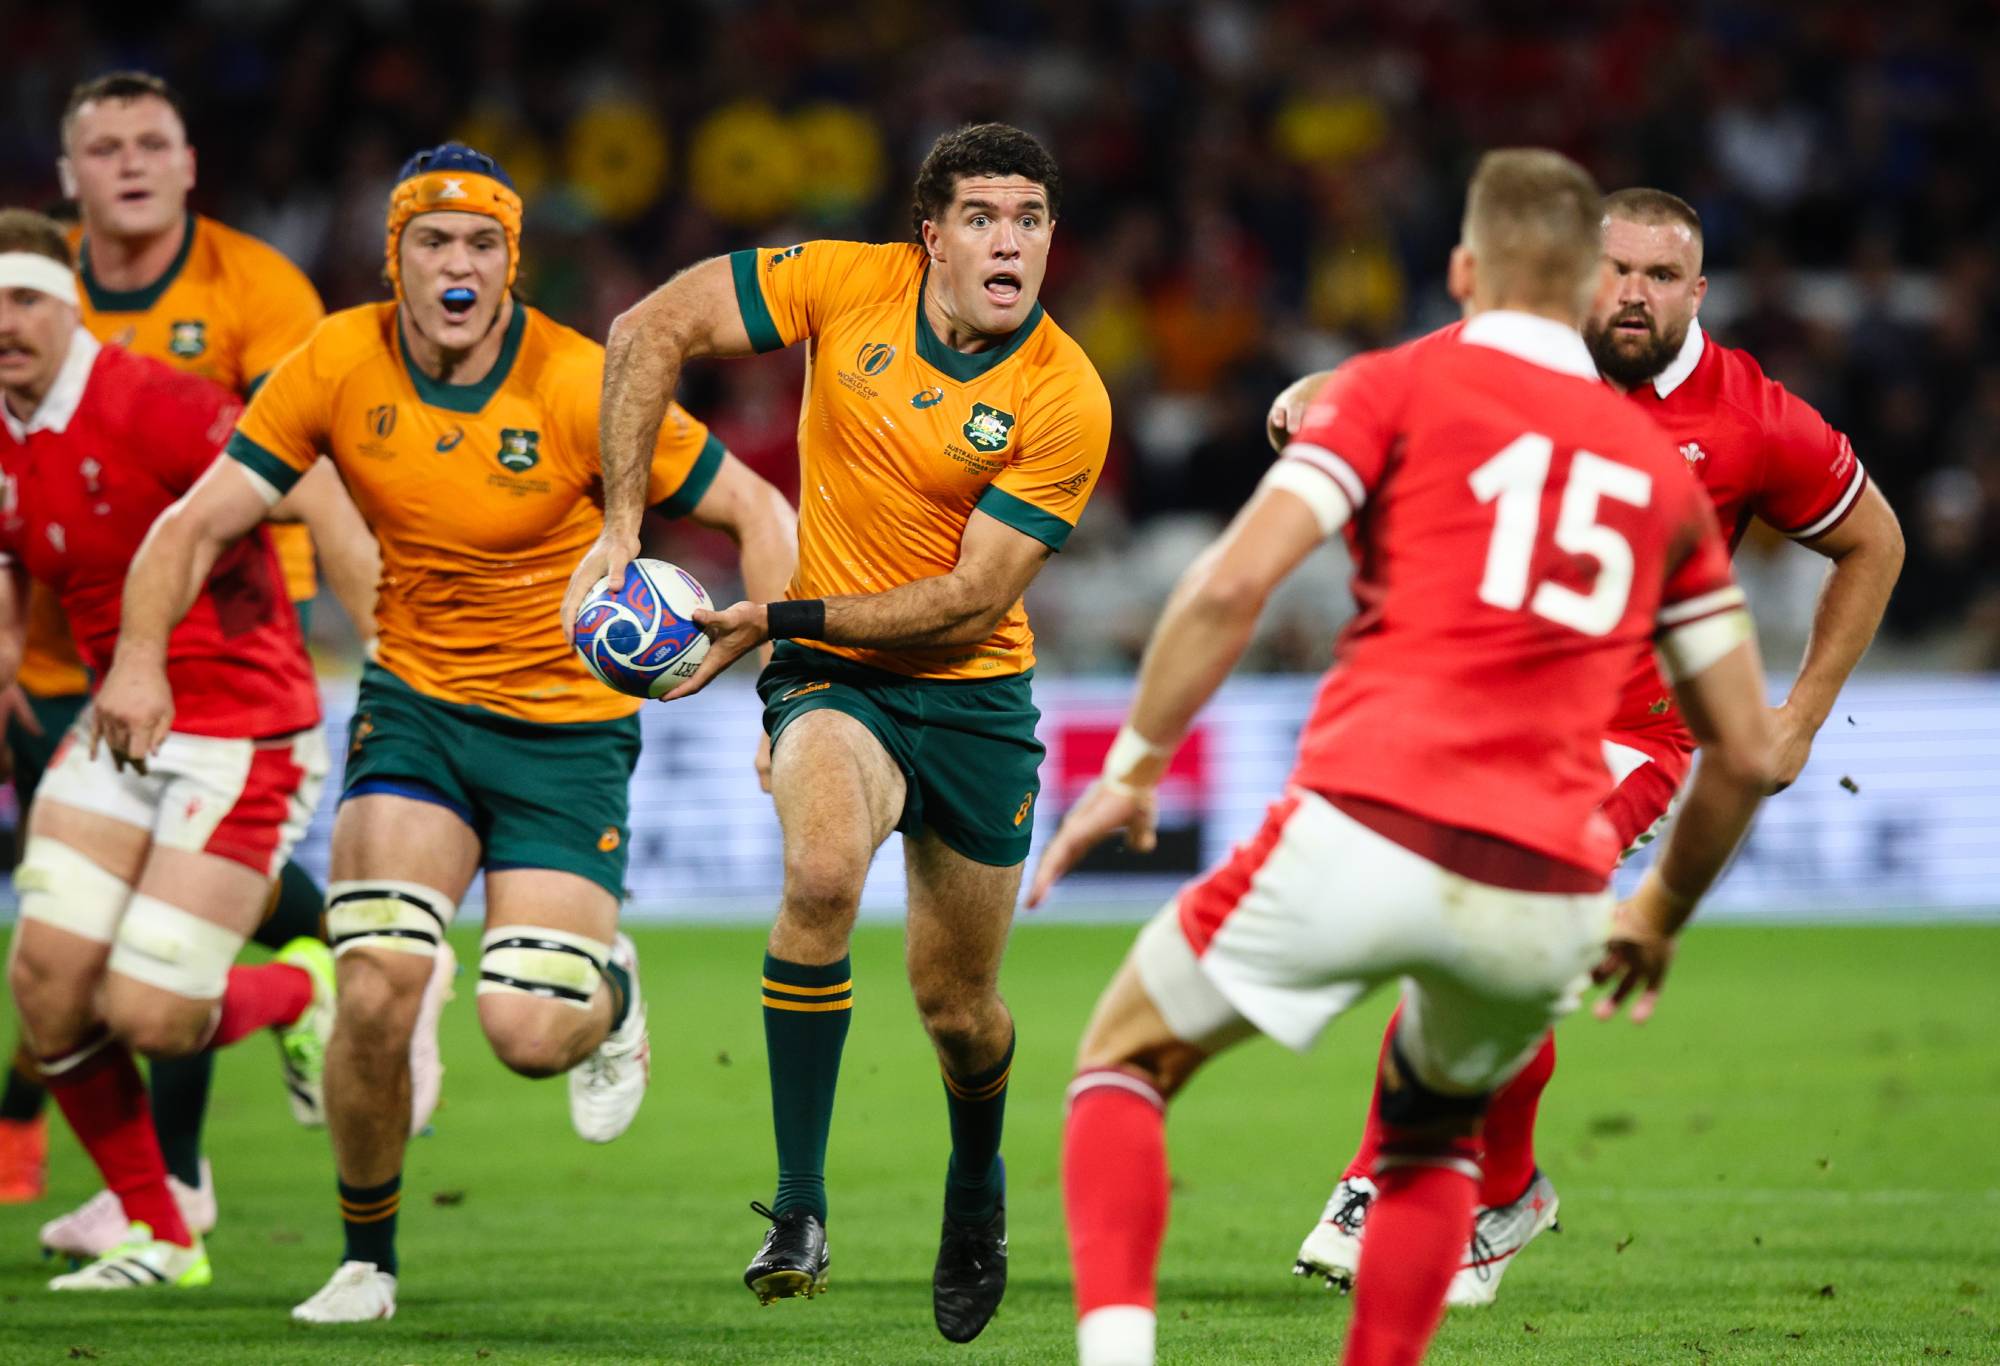 Ben Donaldson of Australia makes a break during the Rugby World Cup France 2023 match between Wales and Australia at Parc Olympique on September 24, 2023 in Lyon, France. (Photo by Craig Mercer/MB Media/Getty Images)